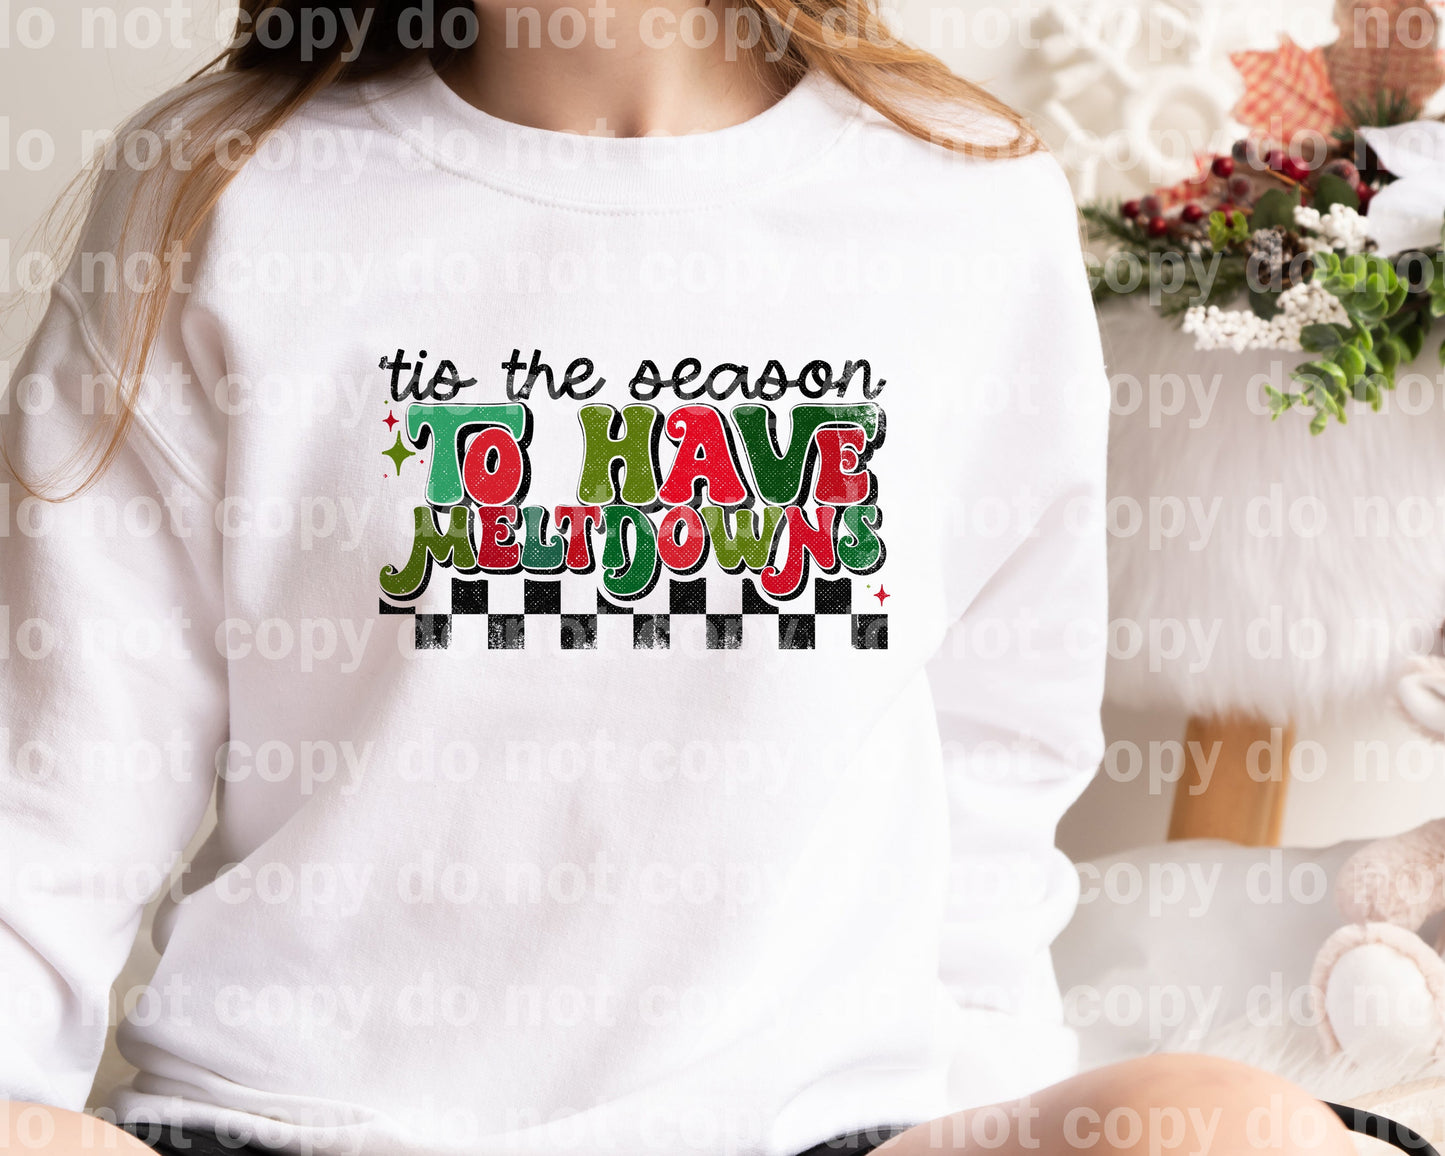 Tis The Season To Have Meltdowns Distressed Dream Print or Sublimation Print